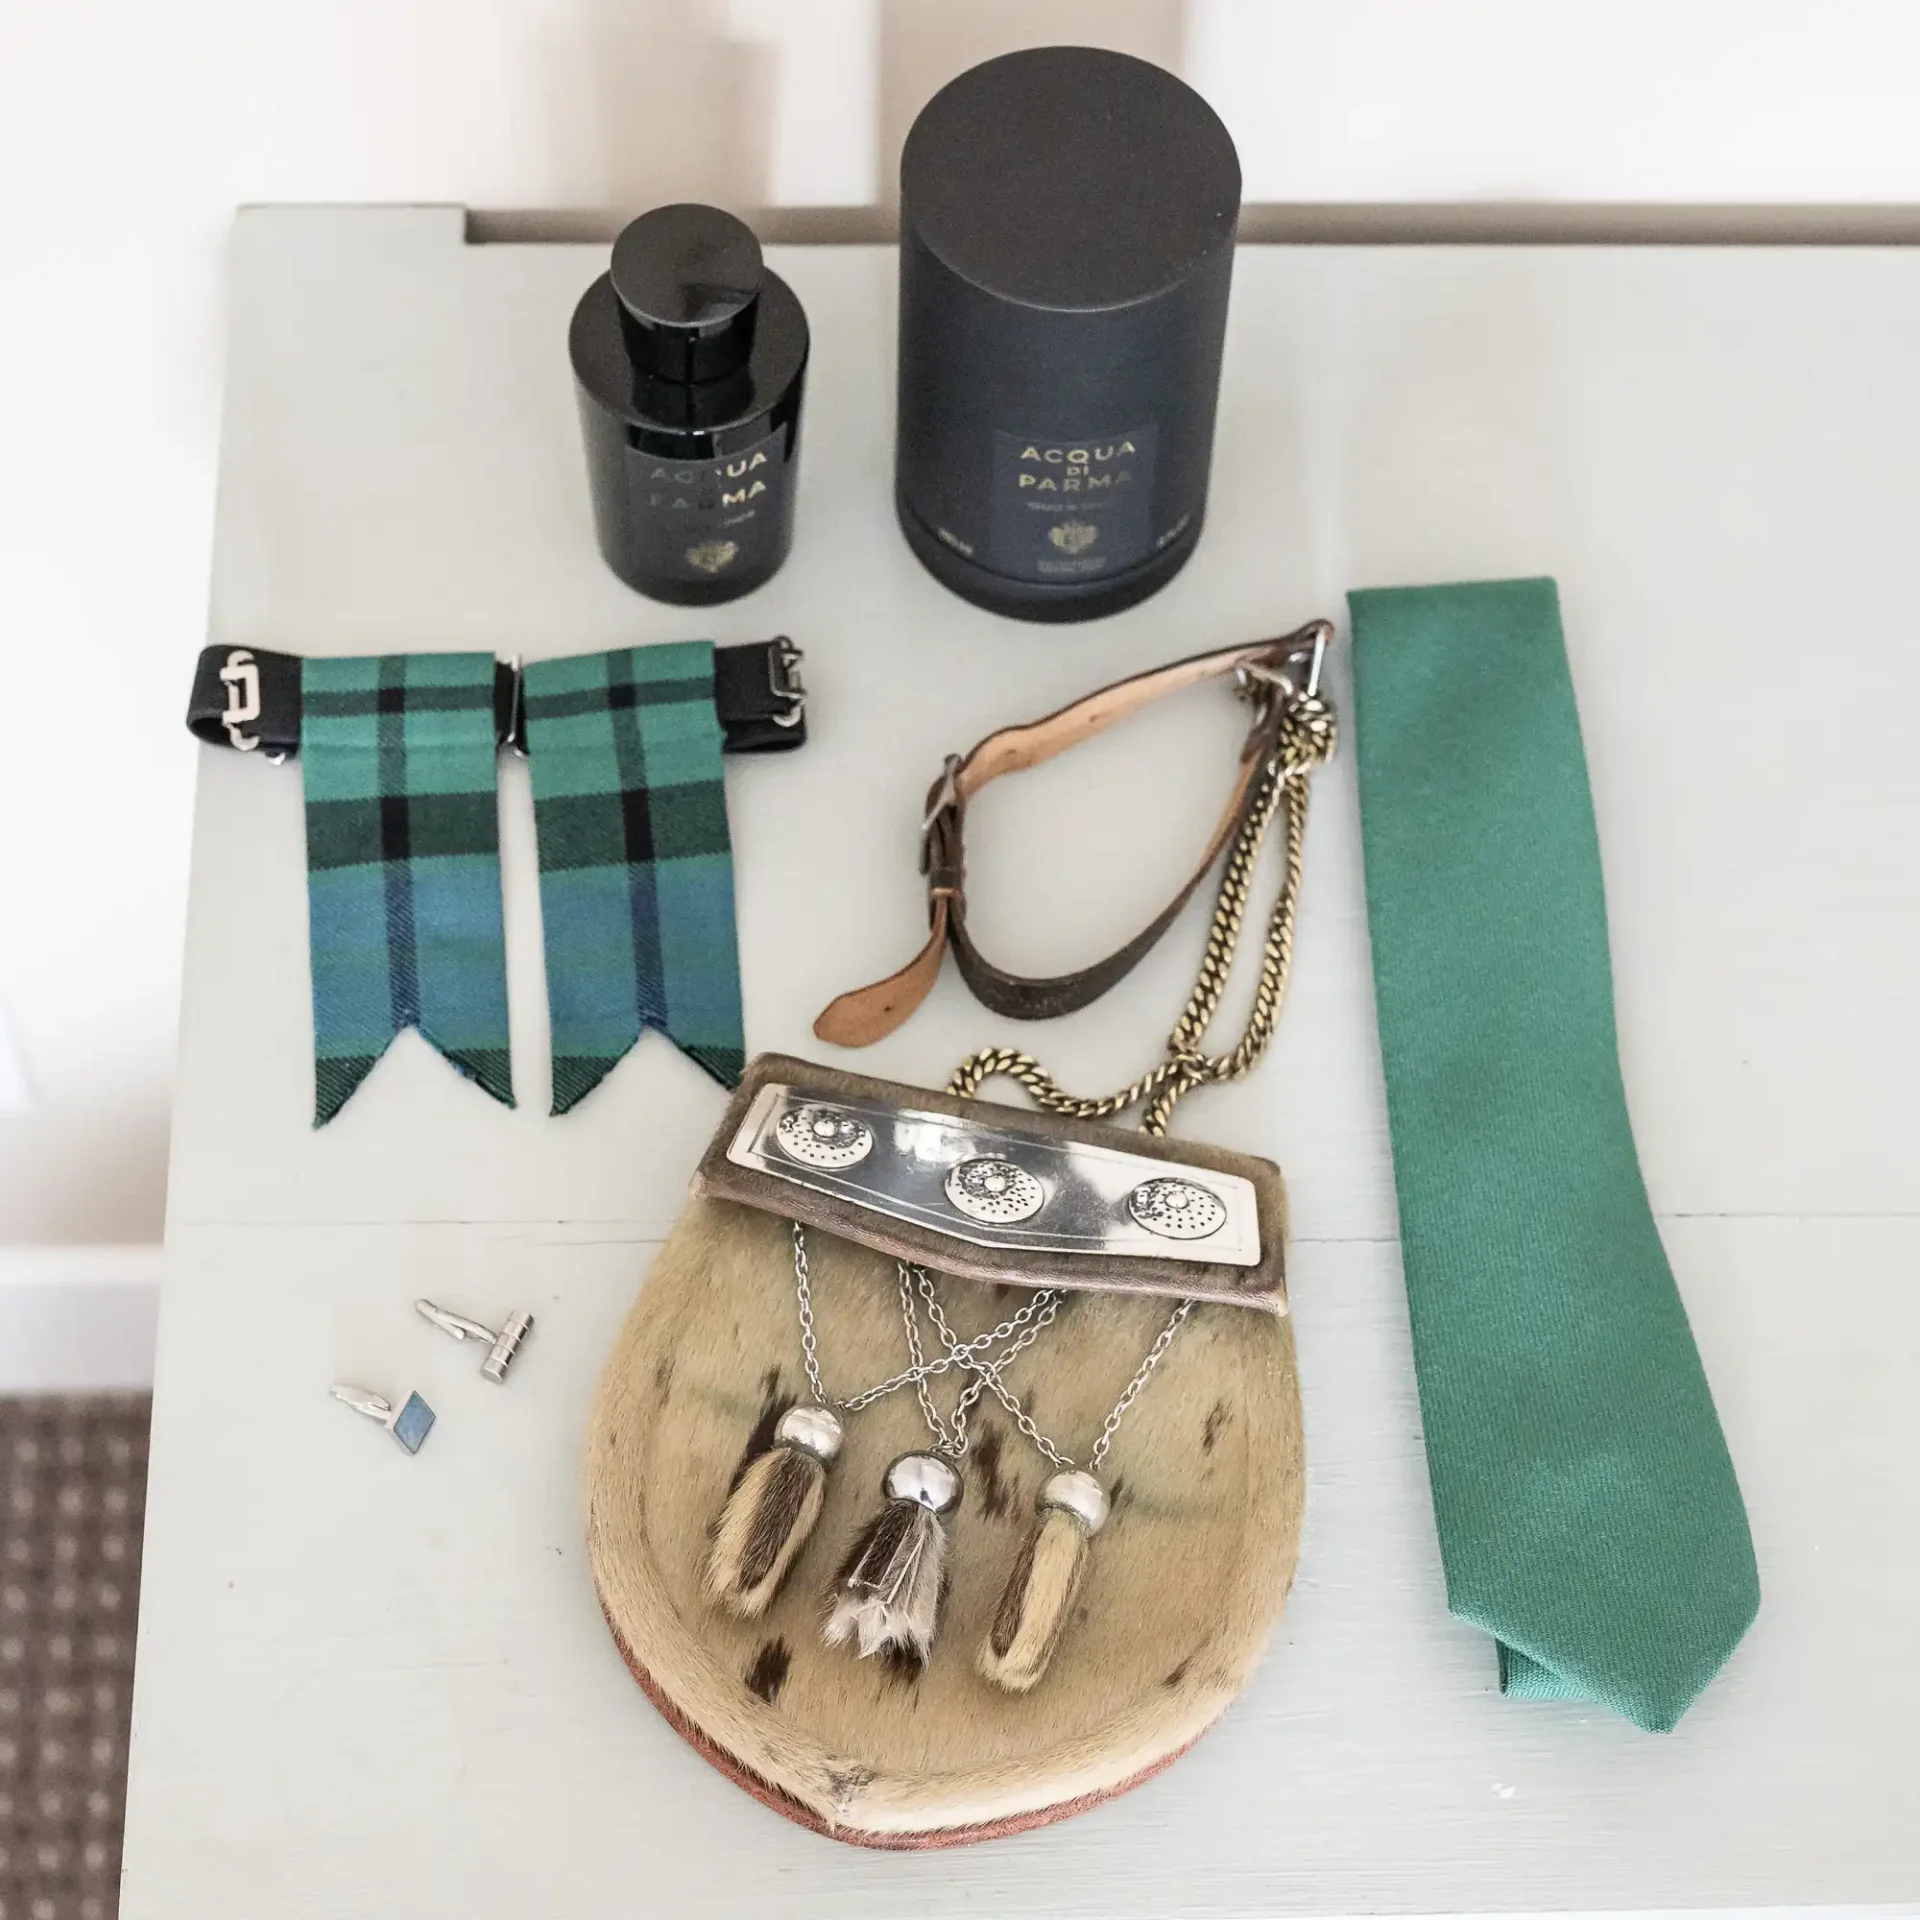 A green tie, plaid suspenders, a sporran, two bottles of cologne, cufflinks, and a leather strap are neatly arranged on a white surface.